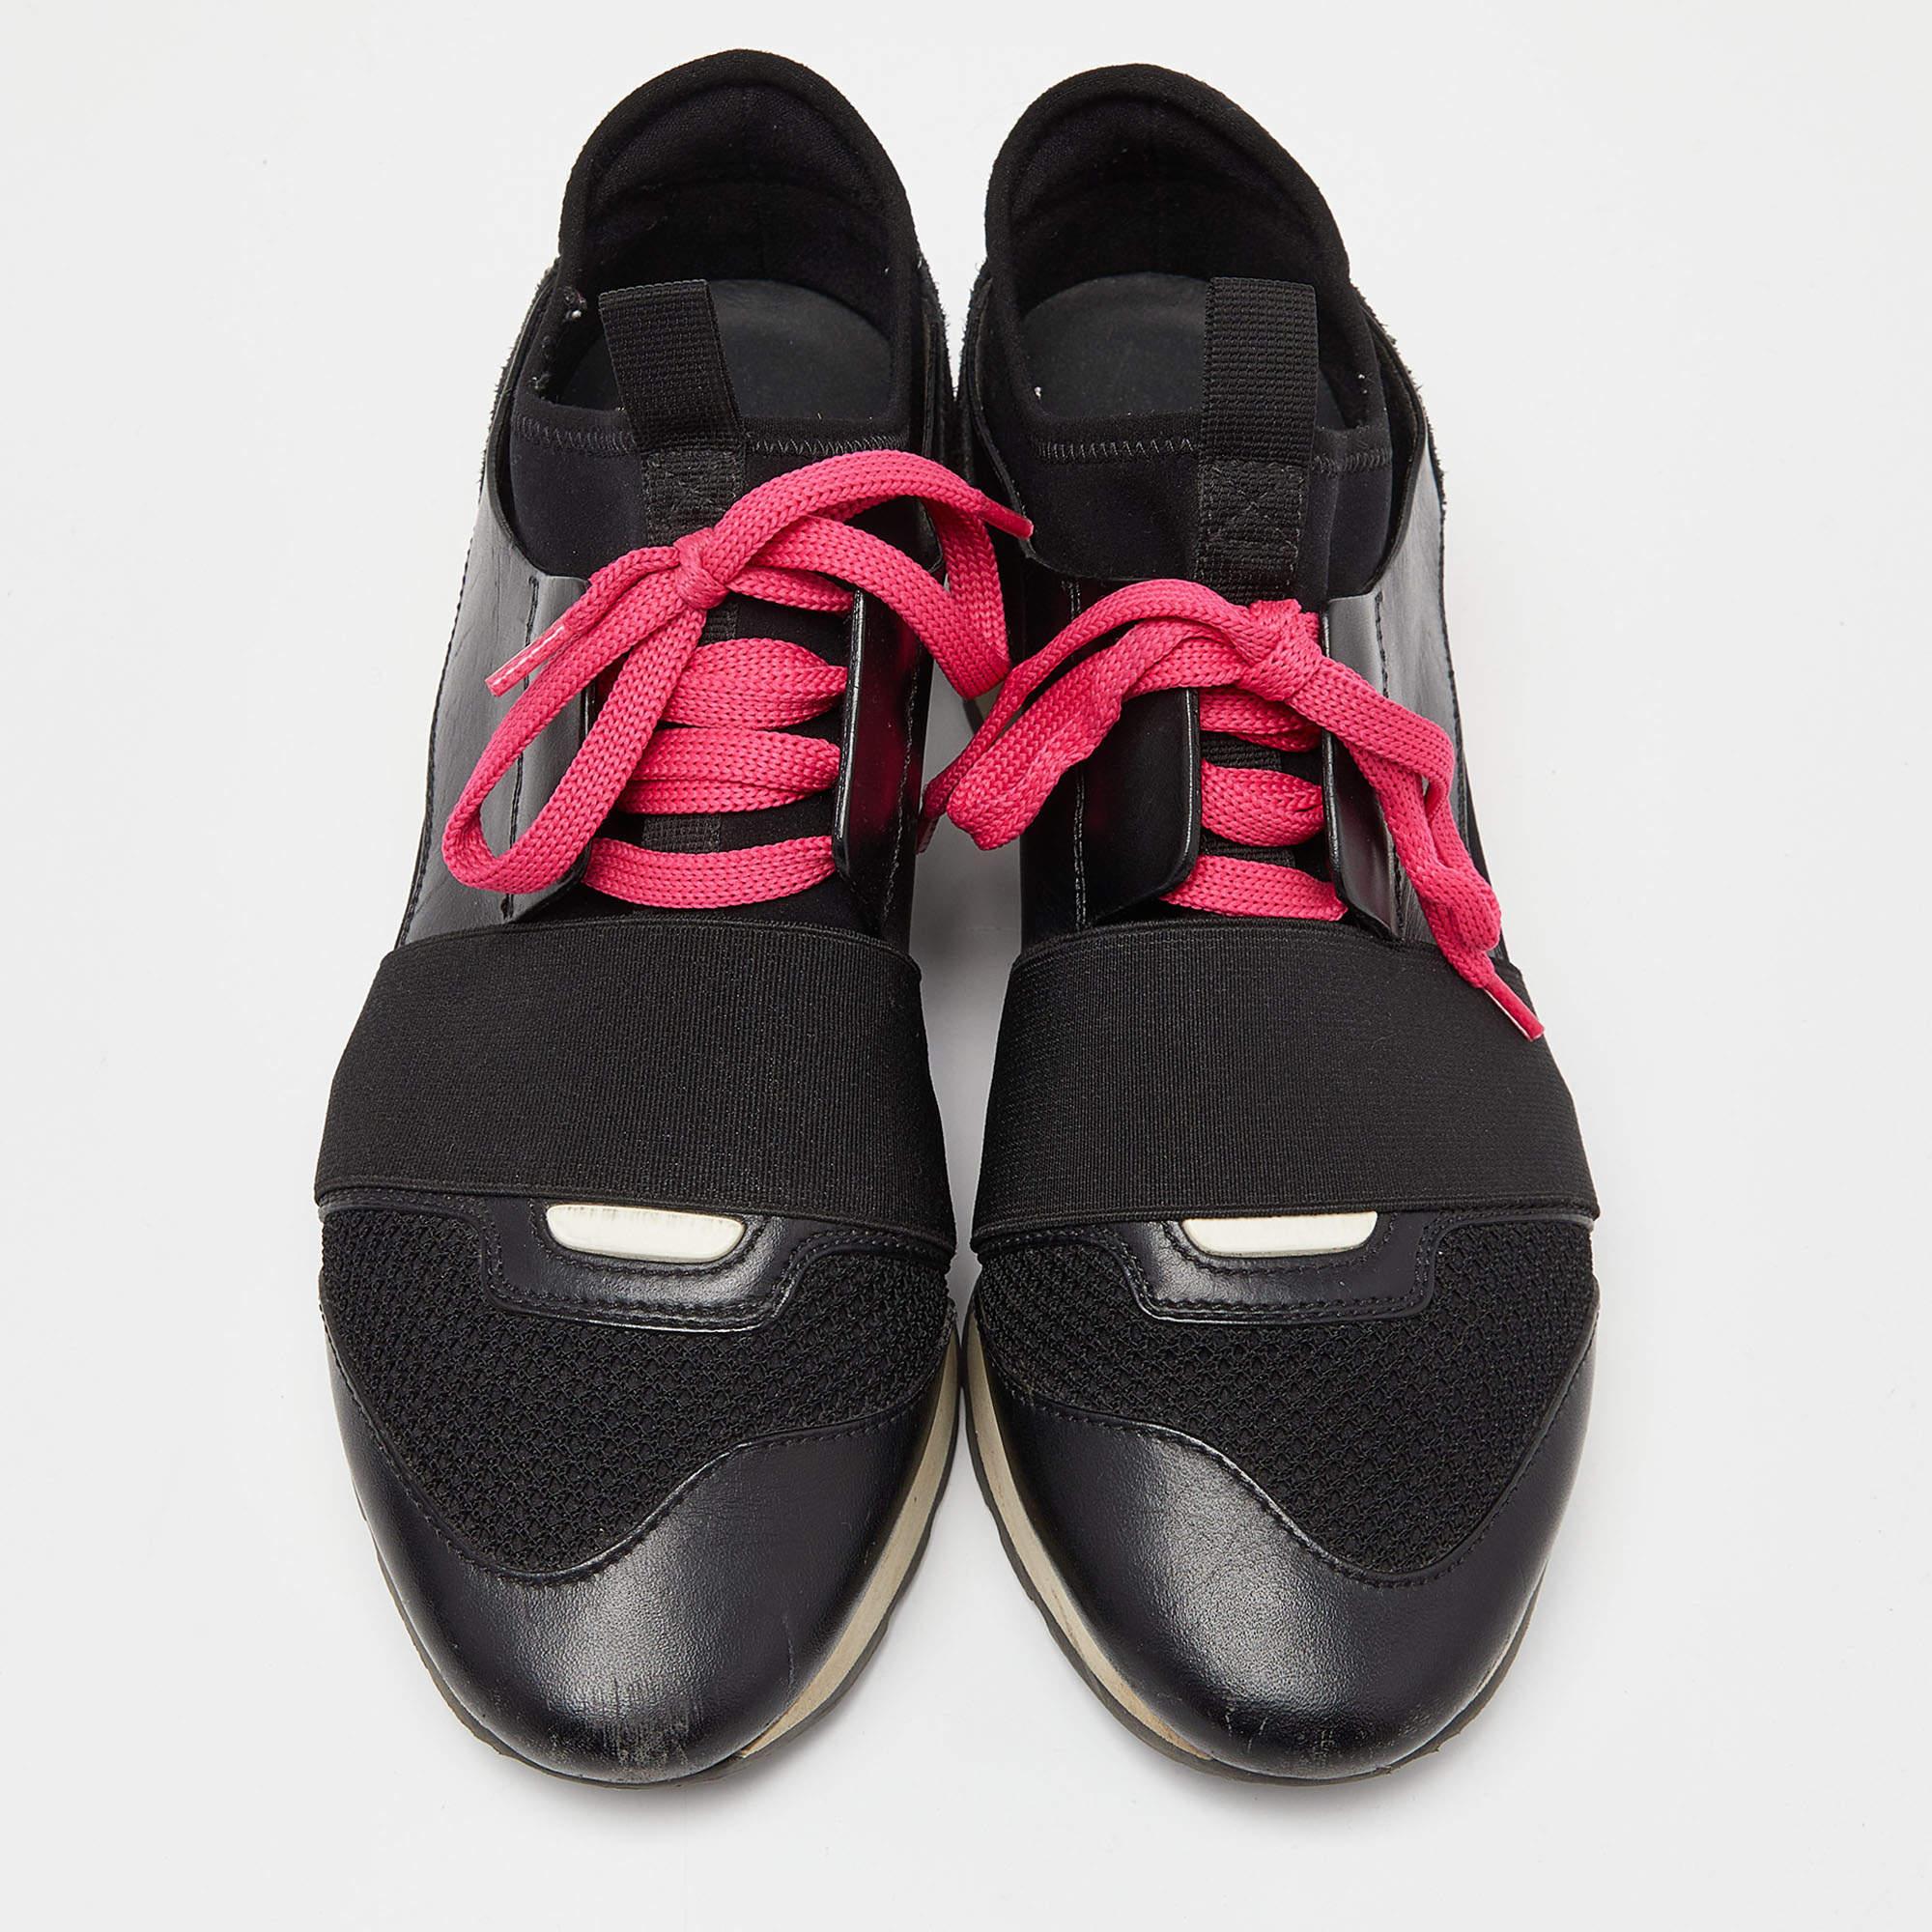 Balenciaga Black/Pink Leather, Suede and Mesh Race Runner Sneakers Size 37 In Good Condition For Sale In Dubai, Al Qouz 2